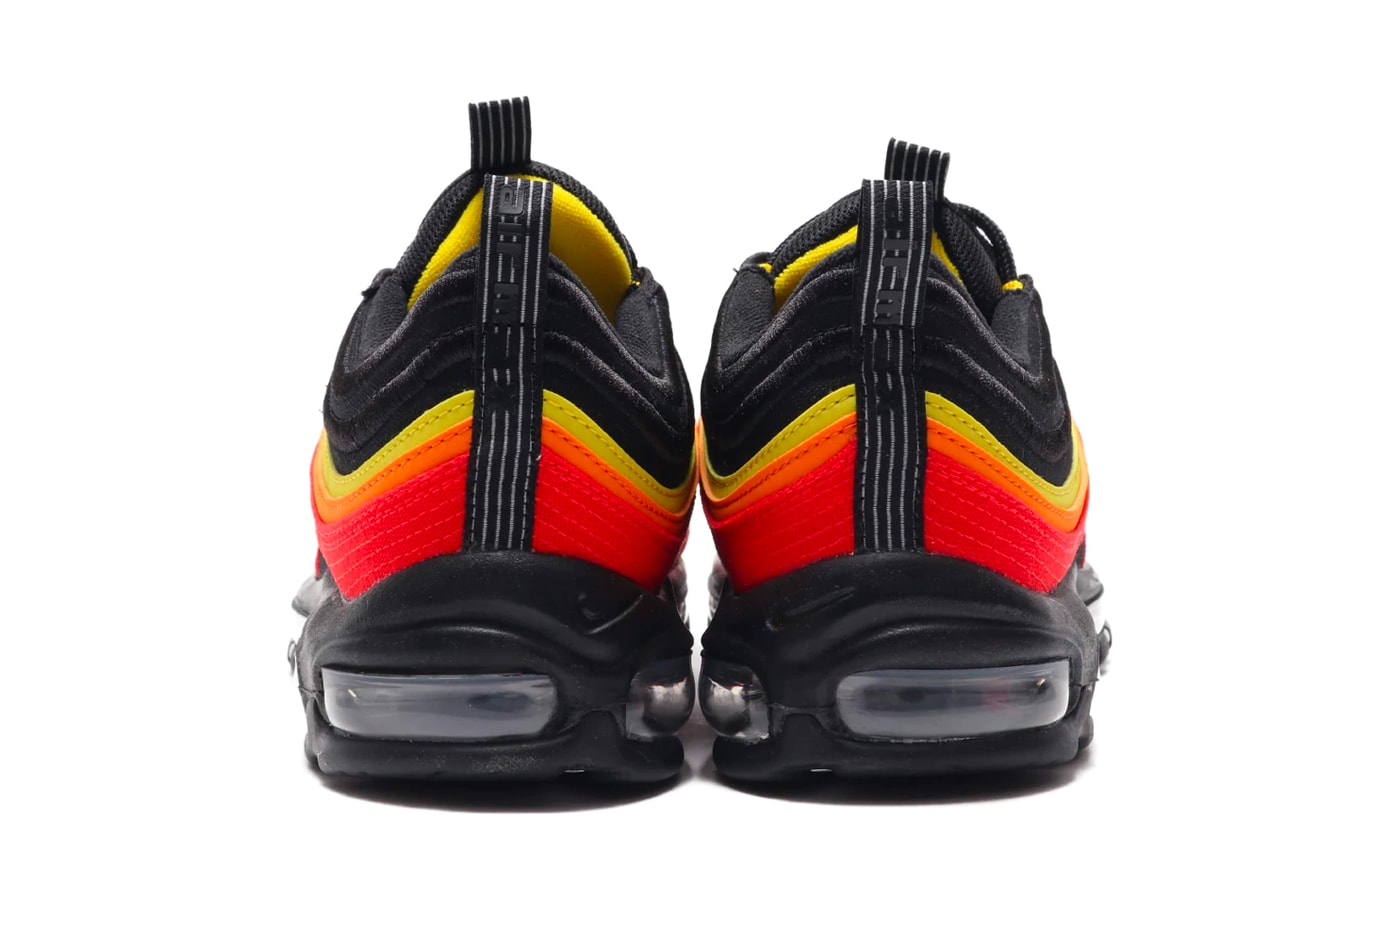 NIKE AIR MAX 97 QS BLACK WHITE CHILE RED MAGMA ORANGE spring summer 2020 collection menswear streetwear ct4525 001 shoes sneakers footwear kicks runners trainers